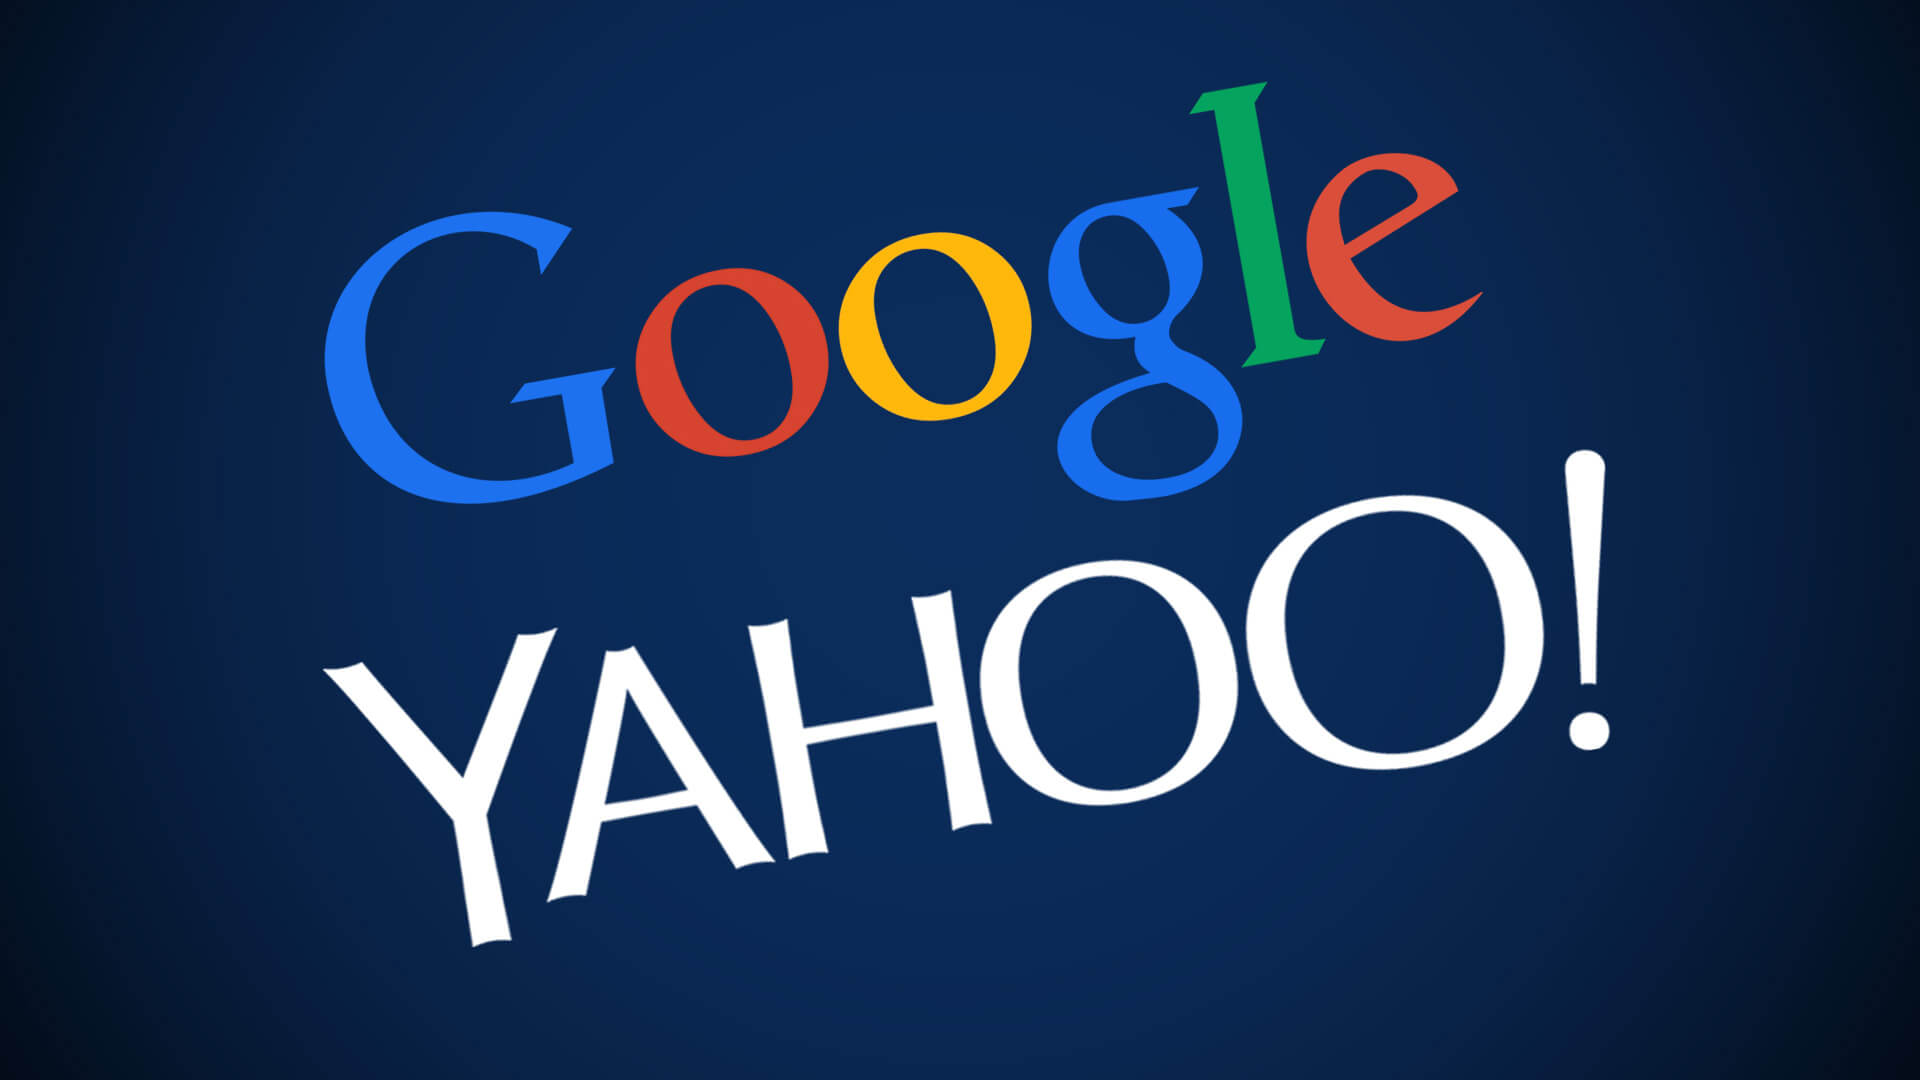 Google and Yahoo have changed their policy, here’s what you need to know and what to do